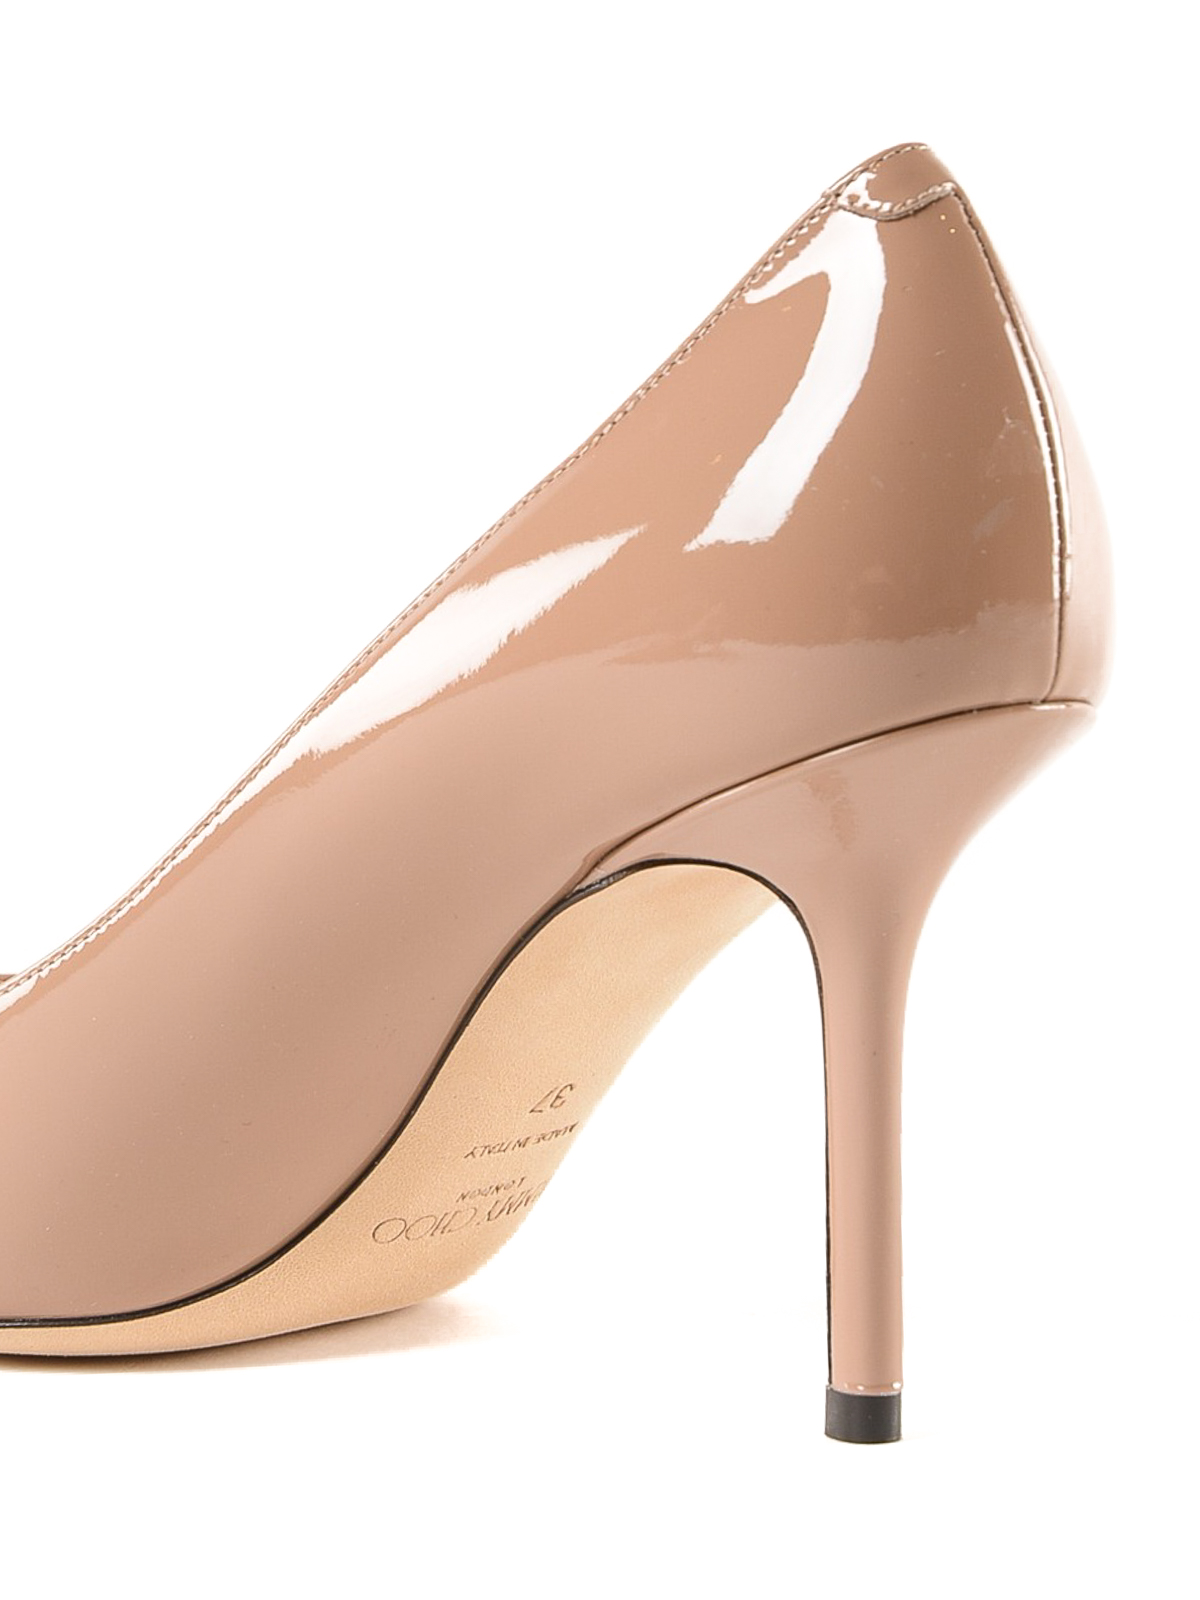 Court shoes Jimmy Choo - Love 85 pink patent leather pumps 